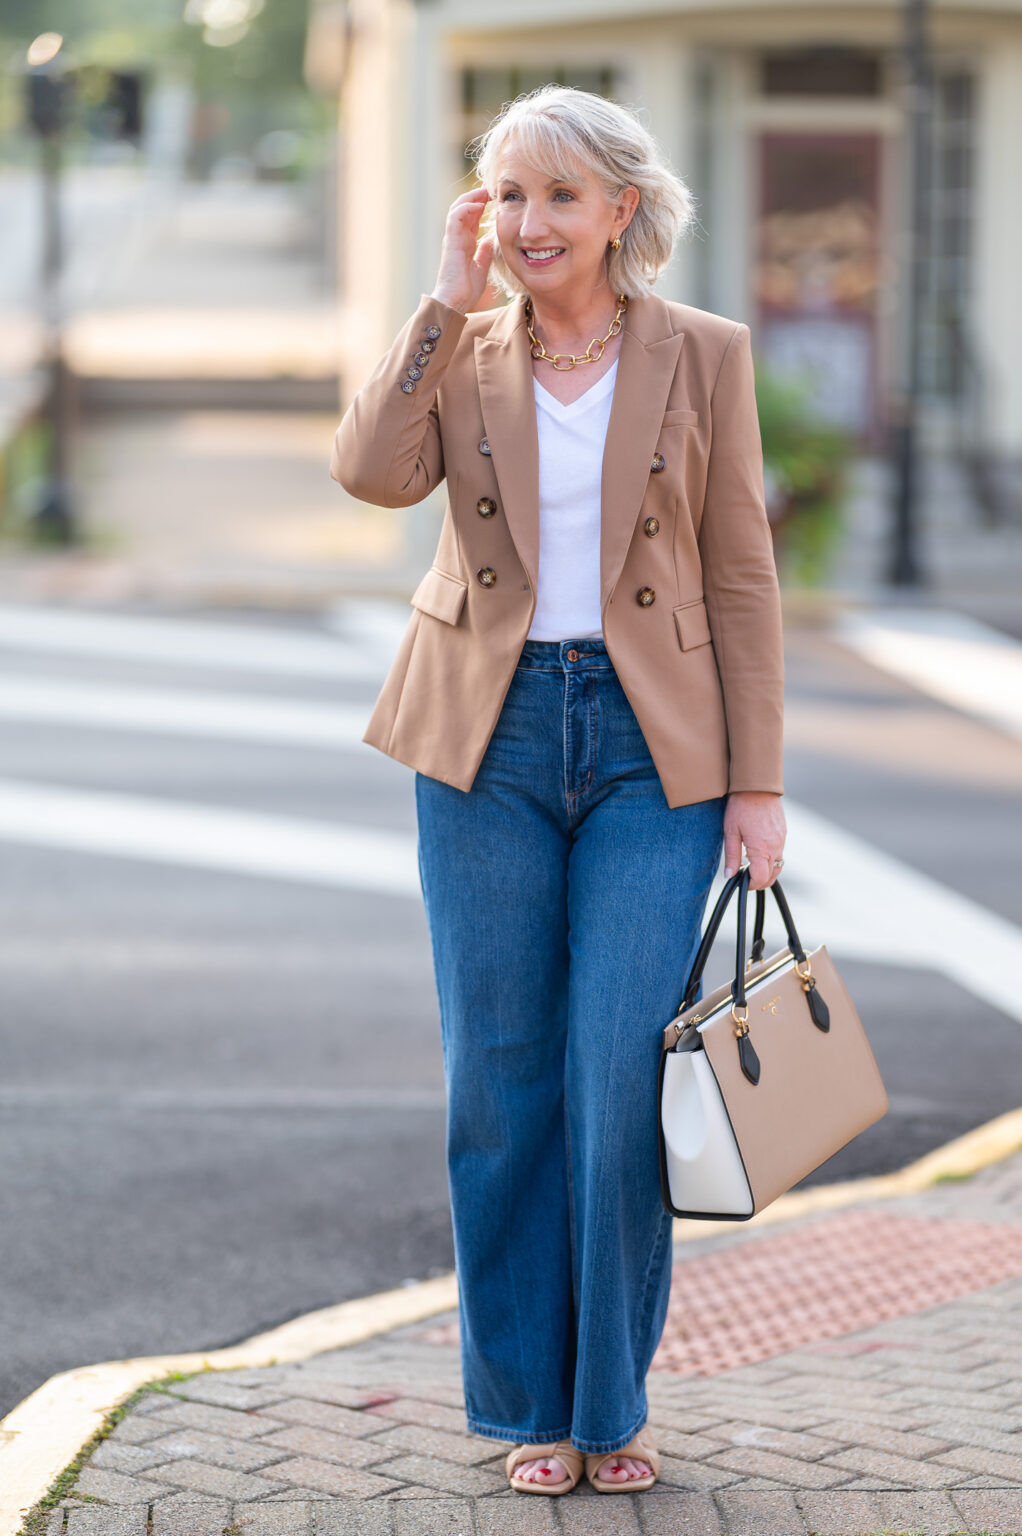 5 Tips to Help You Look Great in Jeans Over 50 - Dressed for My Day